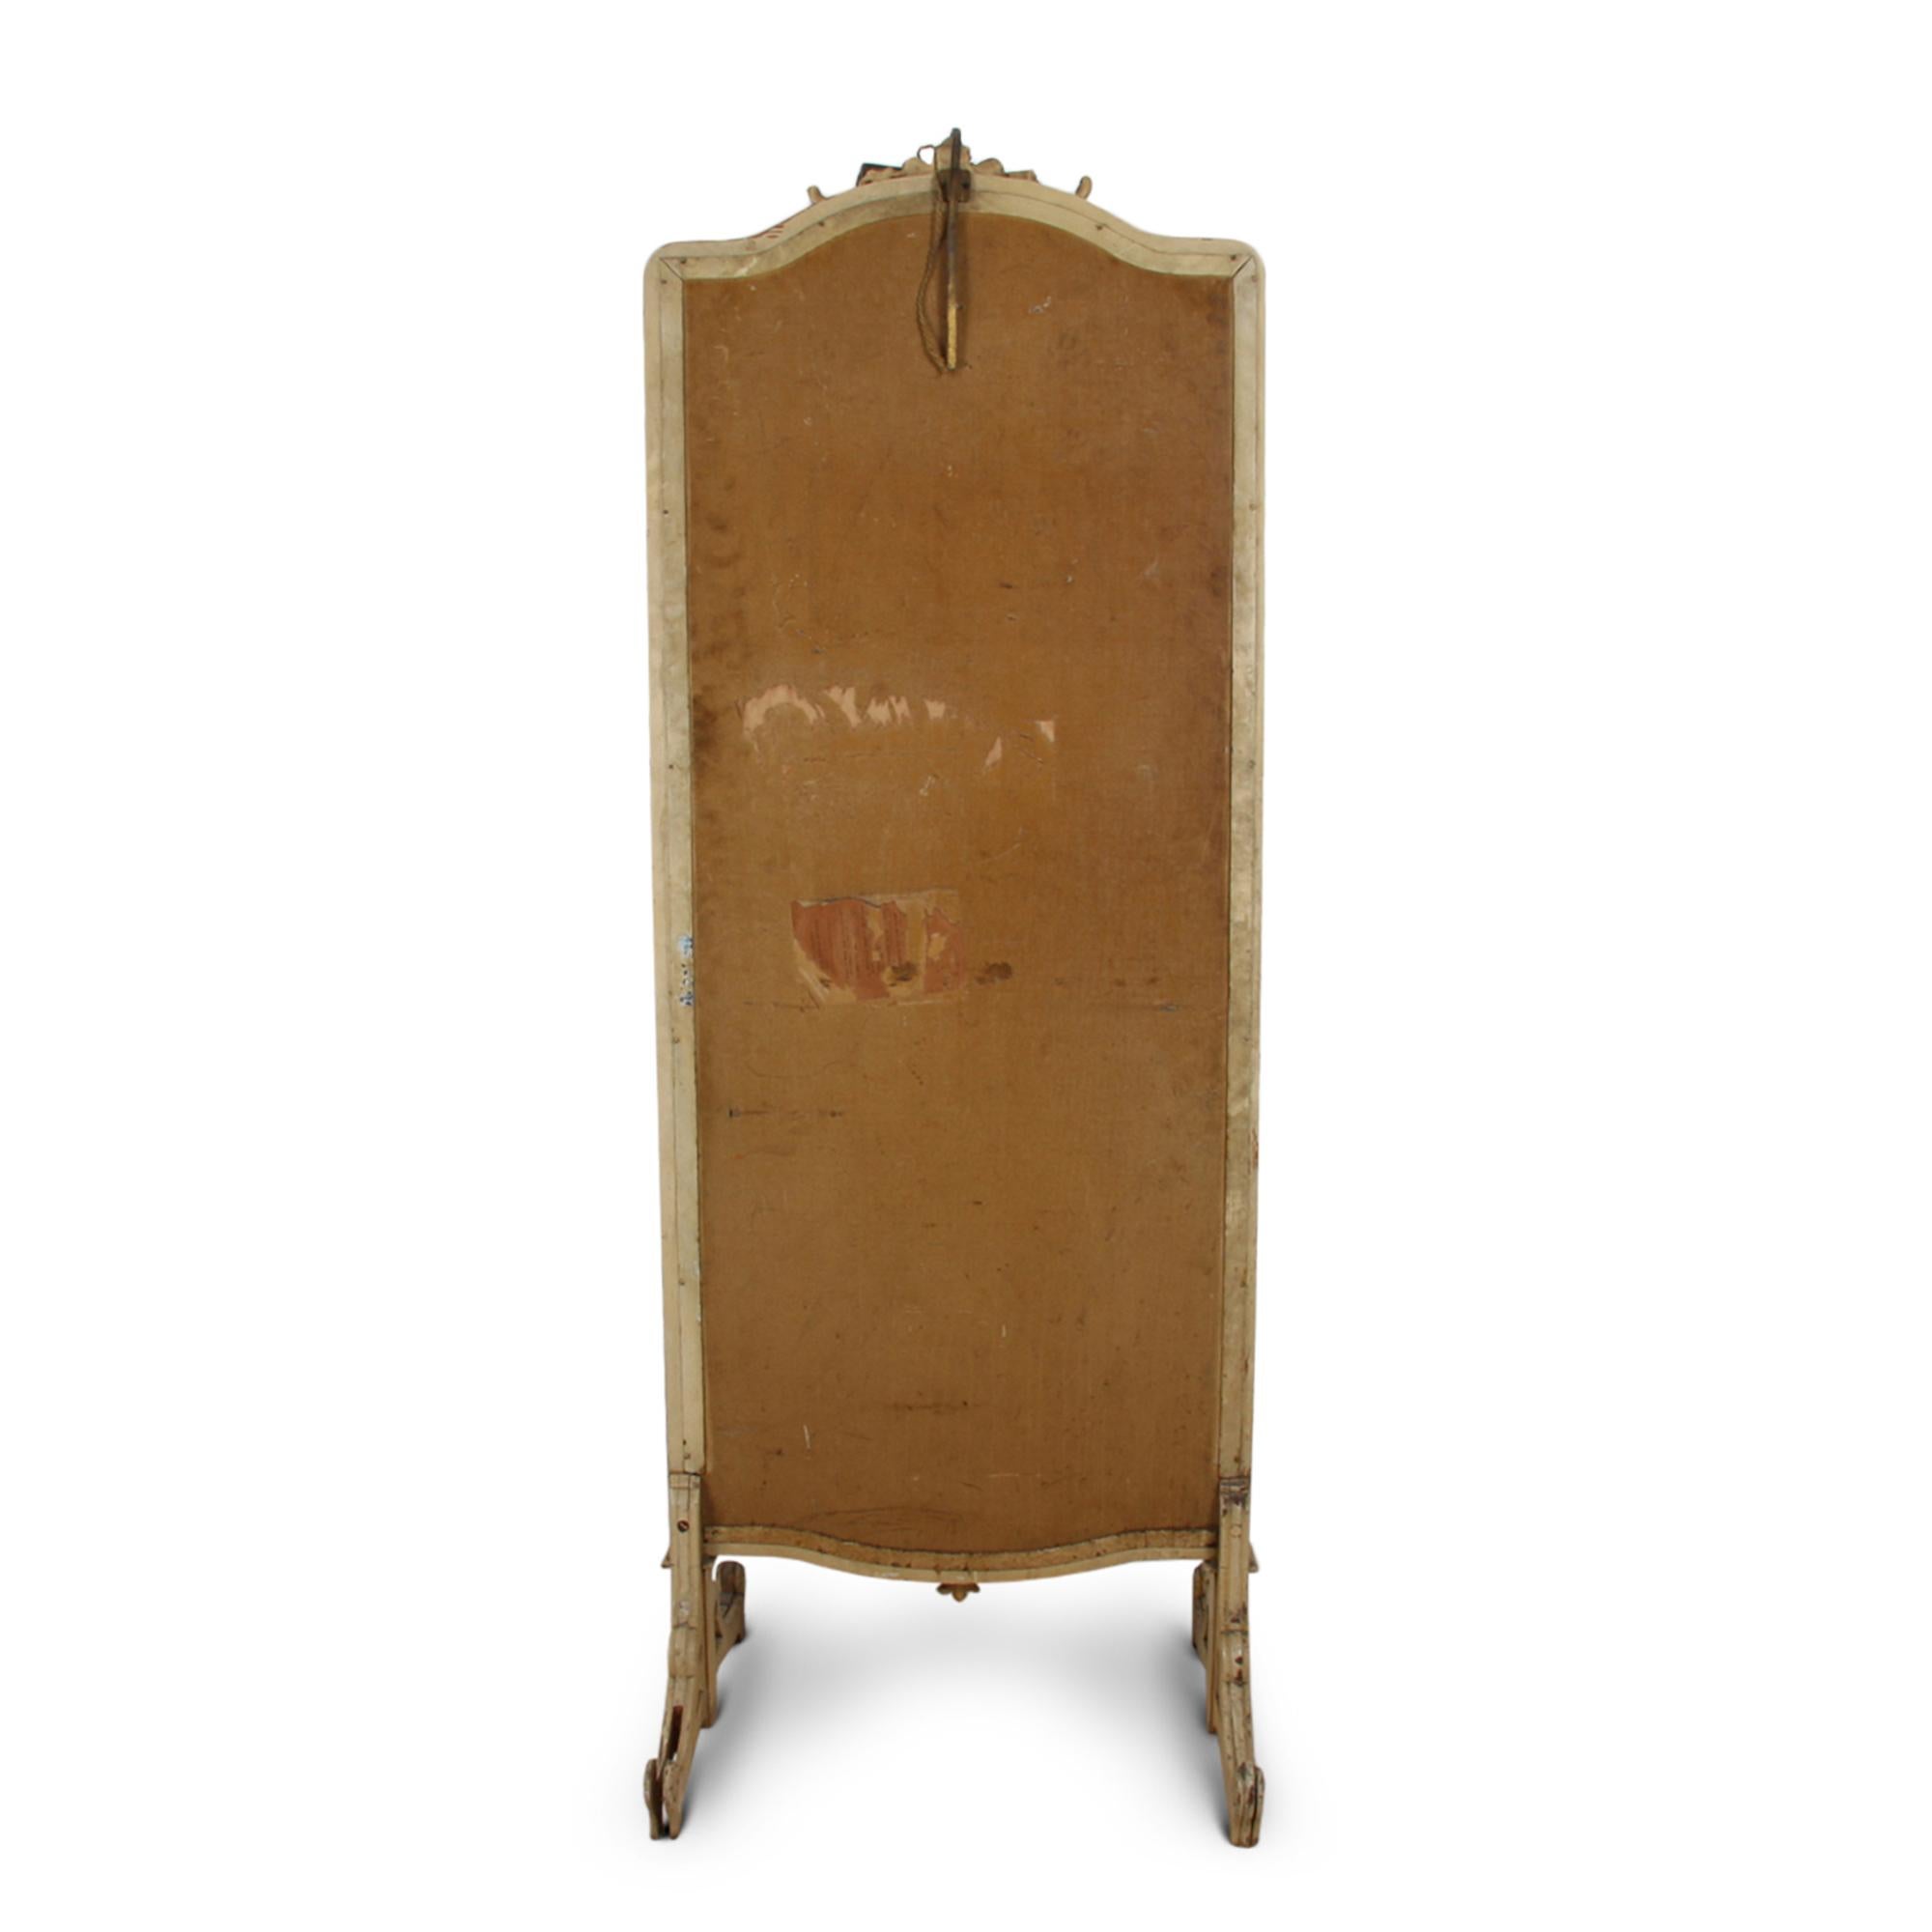 Illuminated by a cantilevered brass lamp, this fantastic floor-standing triptych dressing mirror by the French maker Miroir Brot dates from 1920s, Paris. With original paint and mirror plate. (Maximum width is 122cm when open, minimum width is 68cm